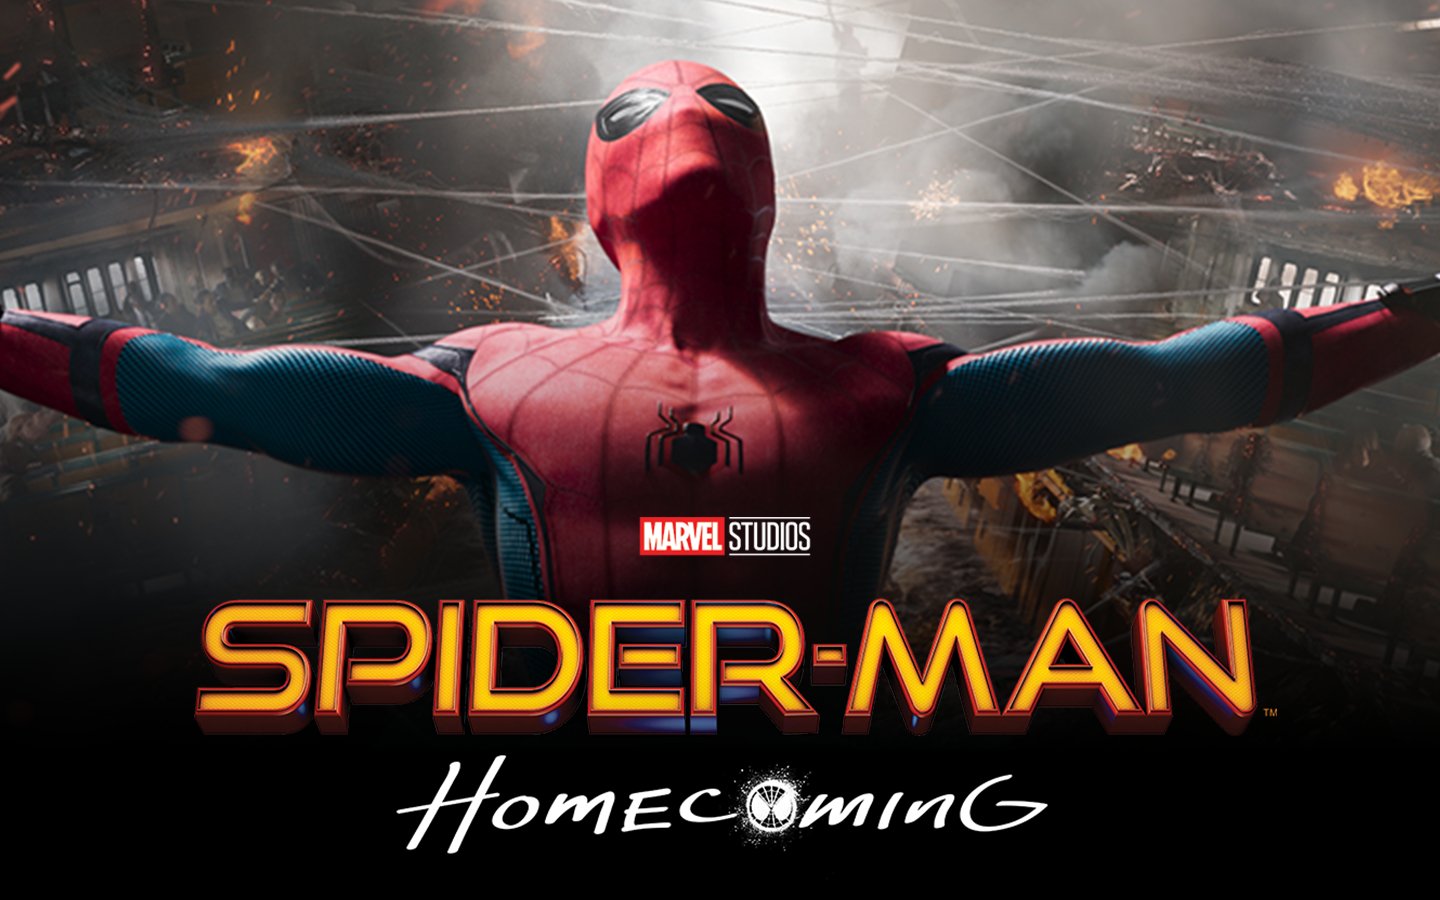 New Image From Spider-Man Homecoming Shows Upgraded CGI